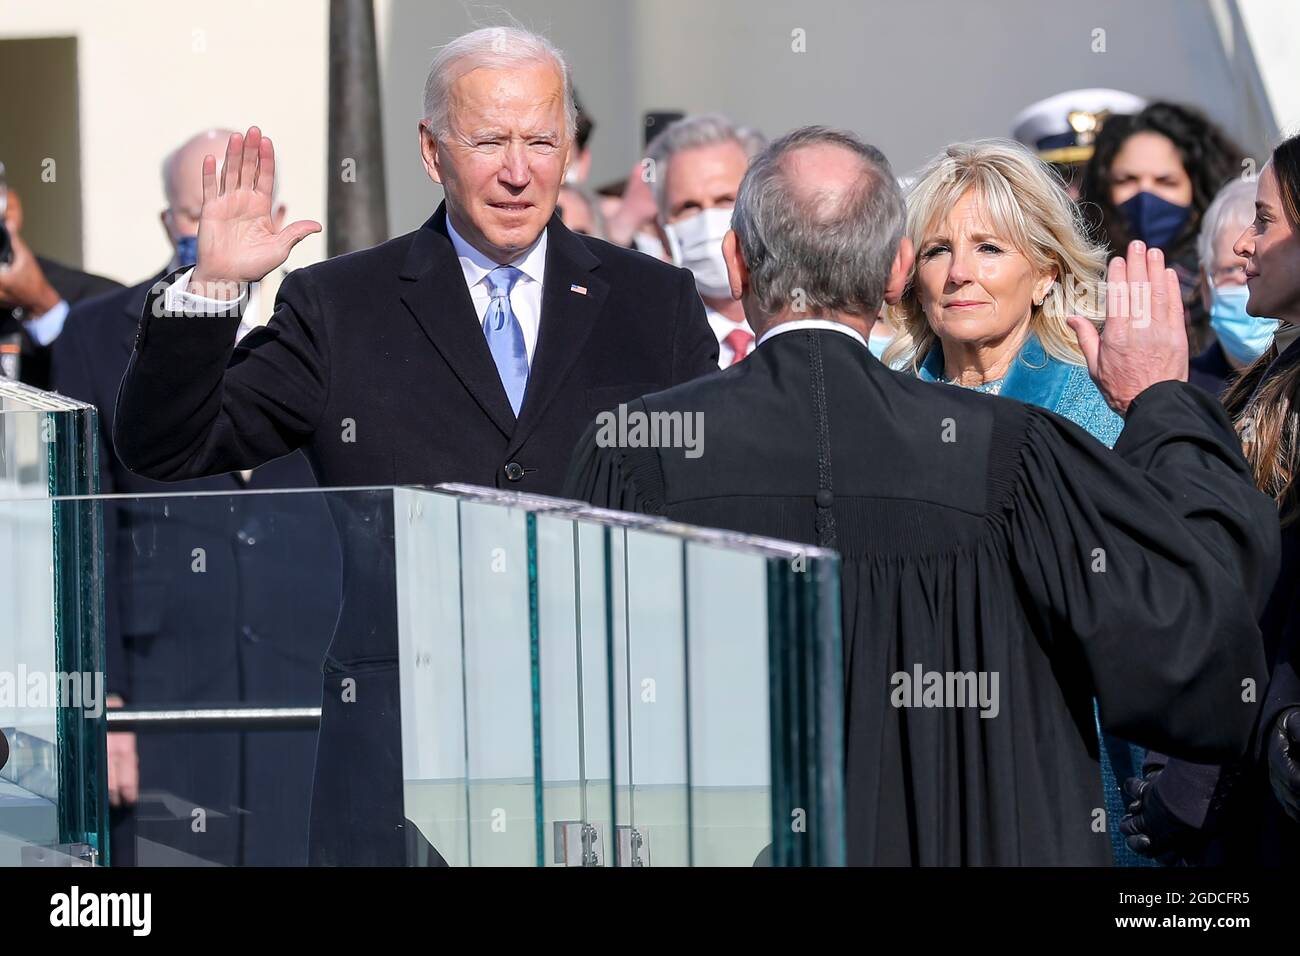 President-elect Joseph R. Biden Jr. takes the presidential oath of office at the U.S. Capitol, Washington, D.C., Jan. 20, 2021. Once the oath was completed, Biden became the 46th President of the United States of America. (DoD photo by U.S. Army Sgt. Charlotte Carulli) Stock Photo